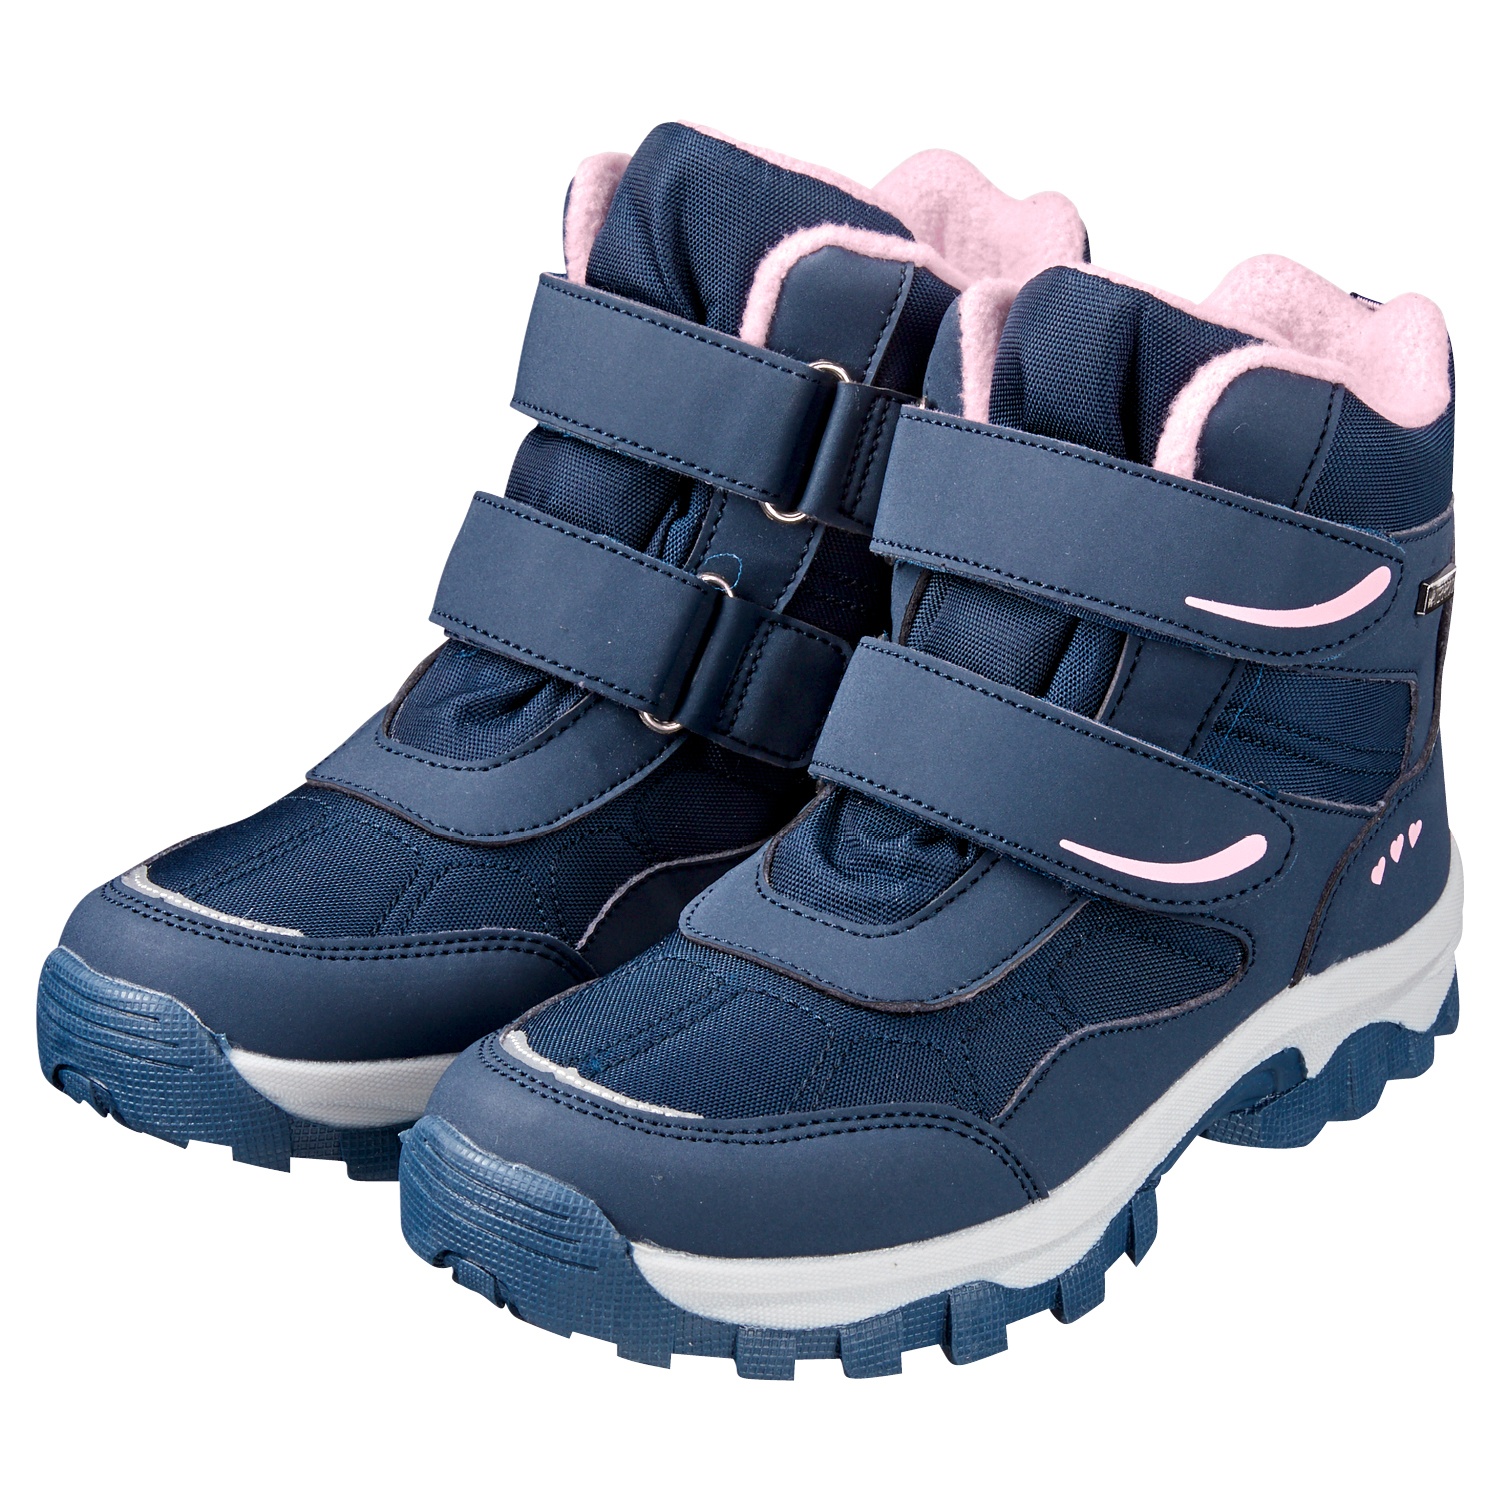 alive® Thermostiefel